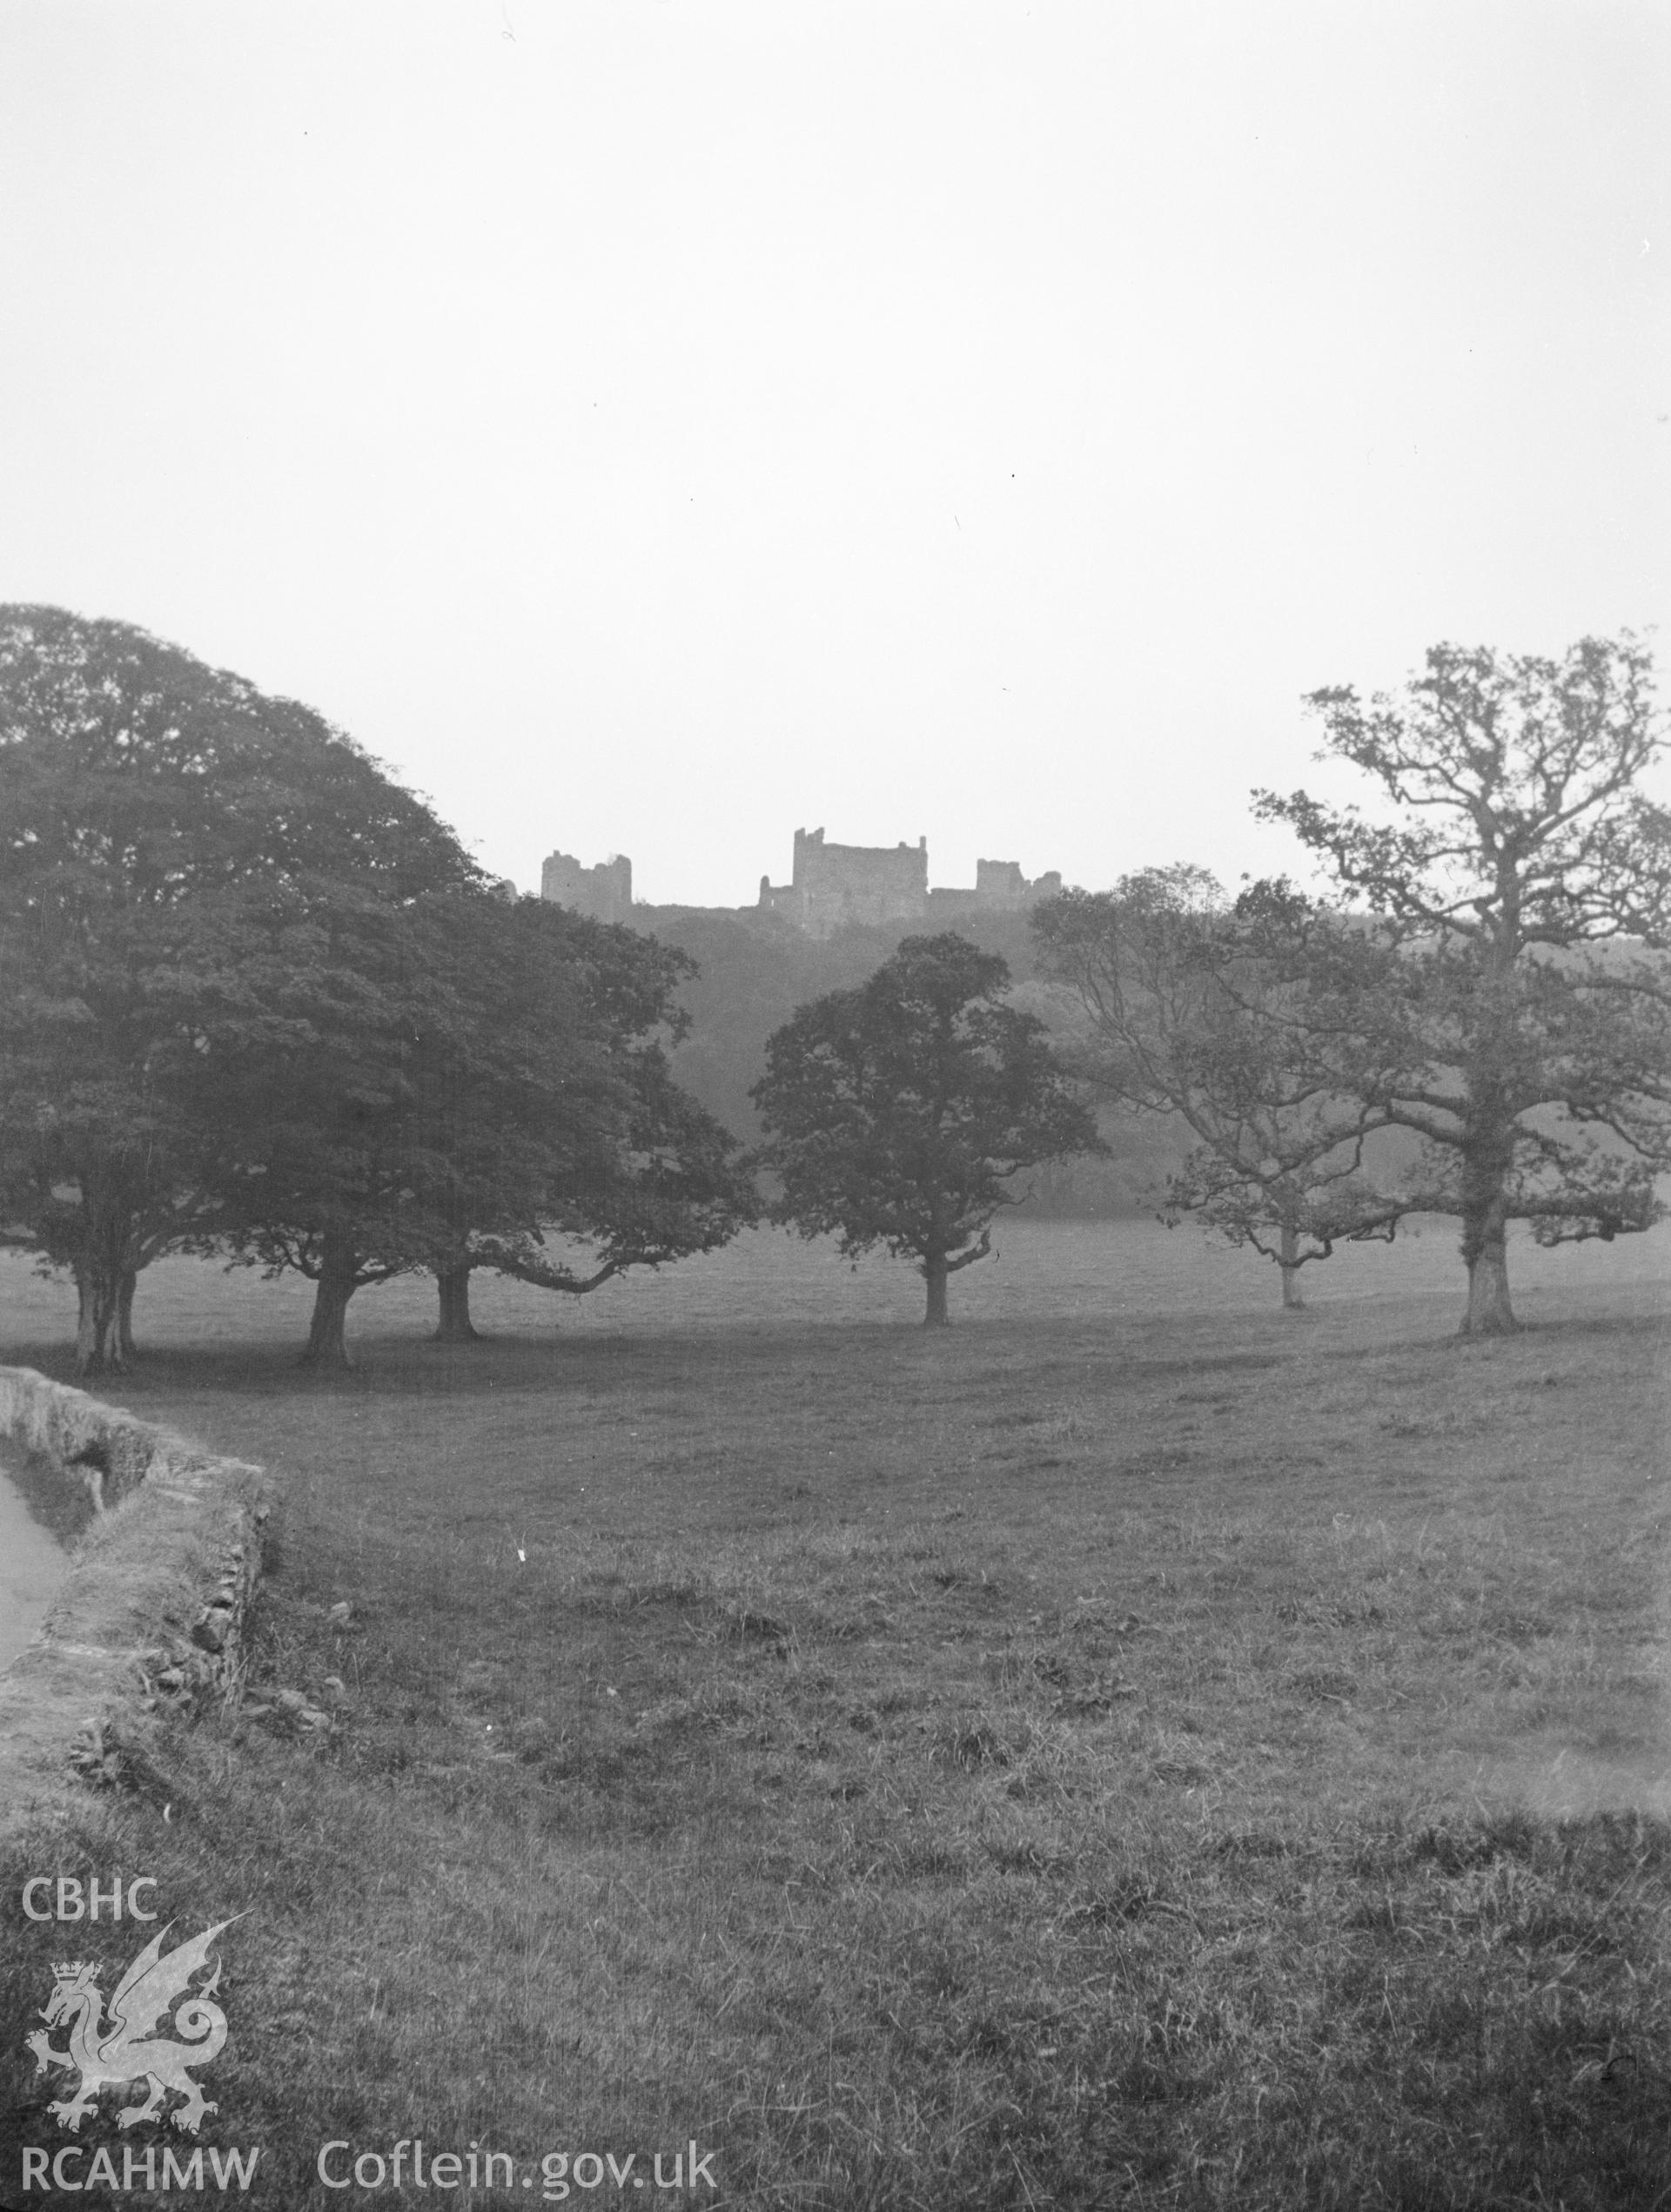 Digital copy of a nitrate negative showing distant view of Llanstephan Castle, from park land. From the National Building Record Postcard Collection.